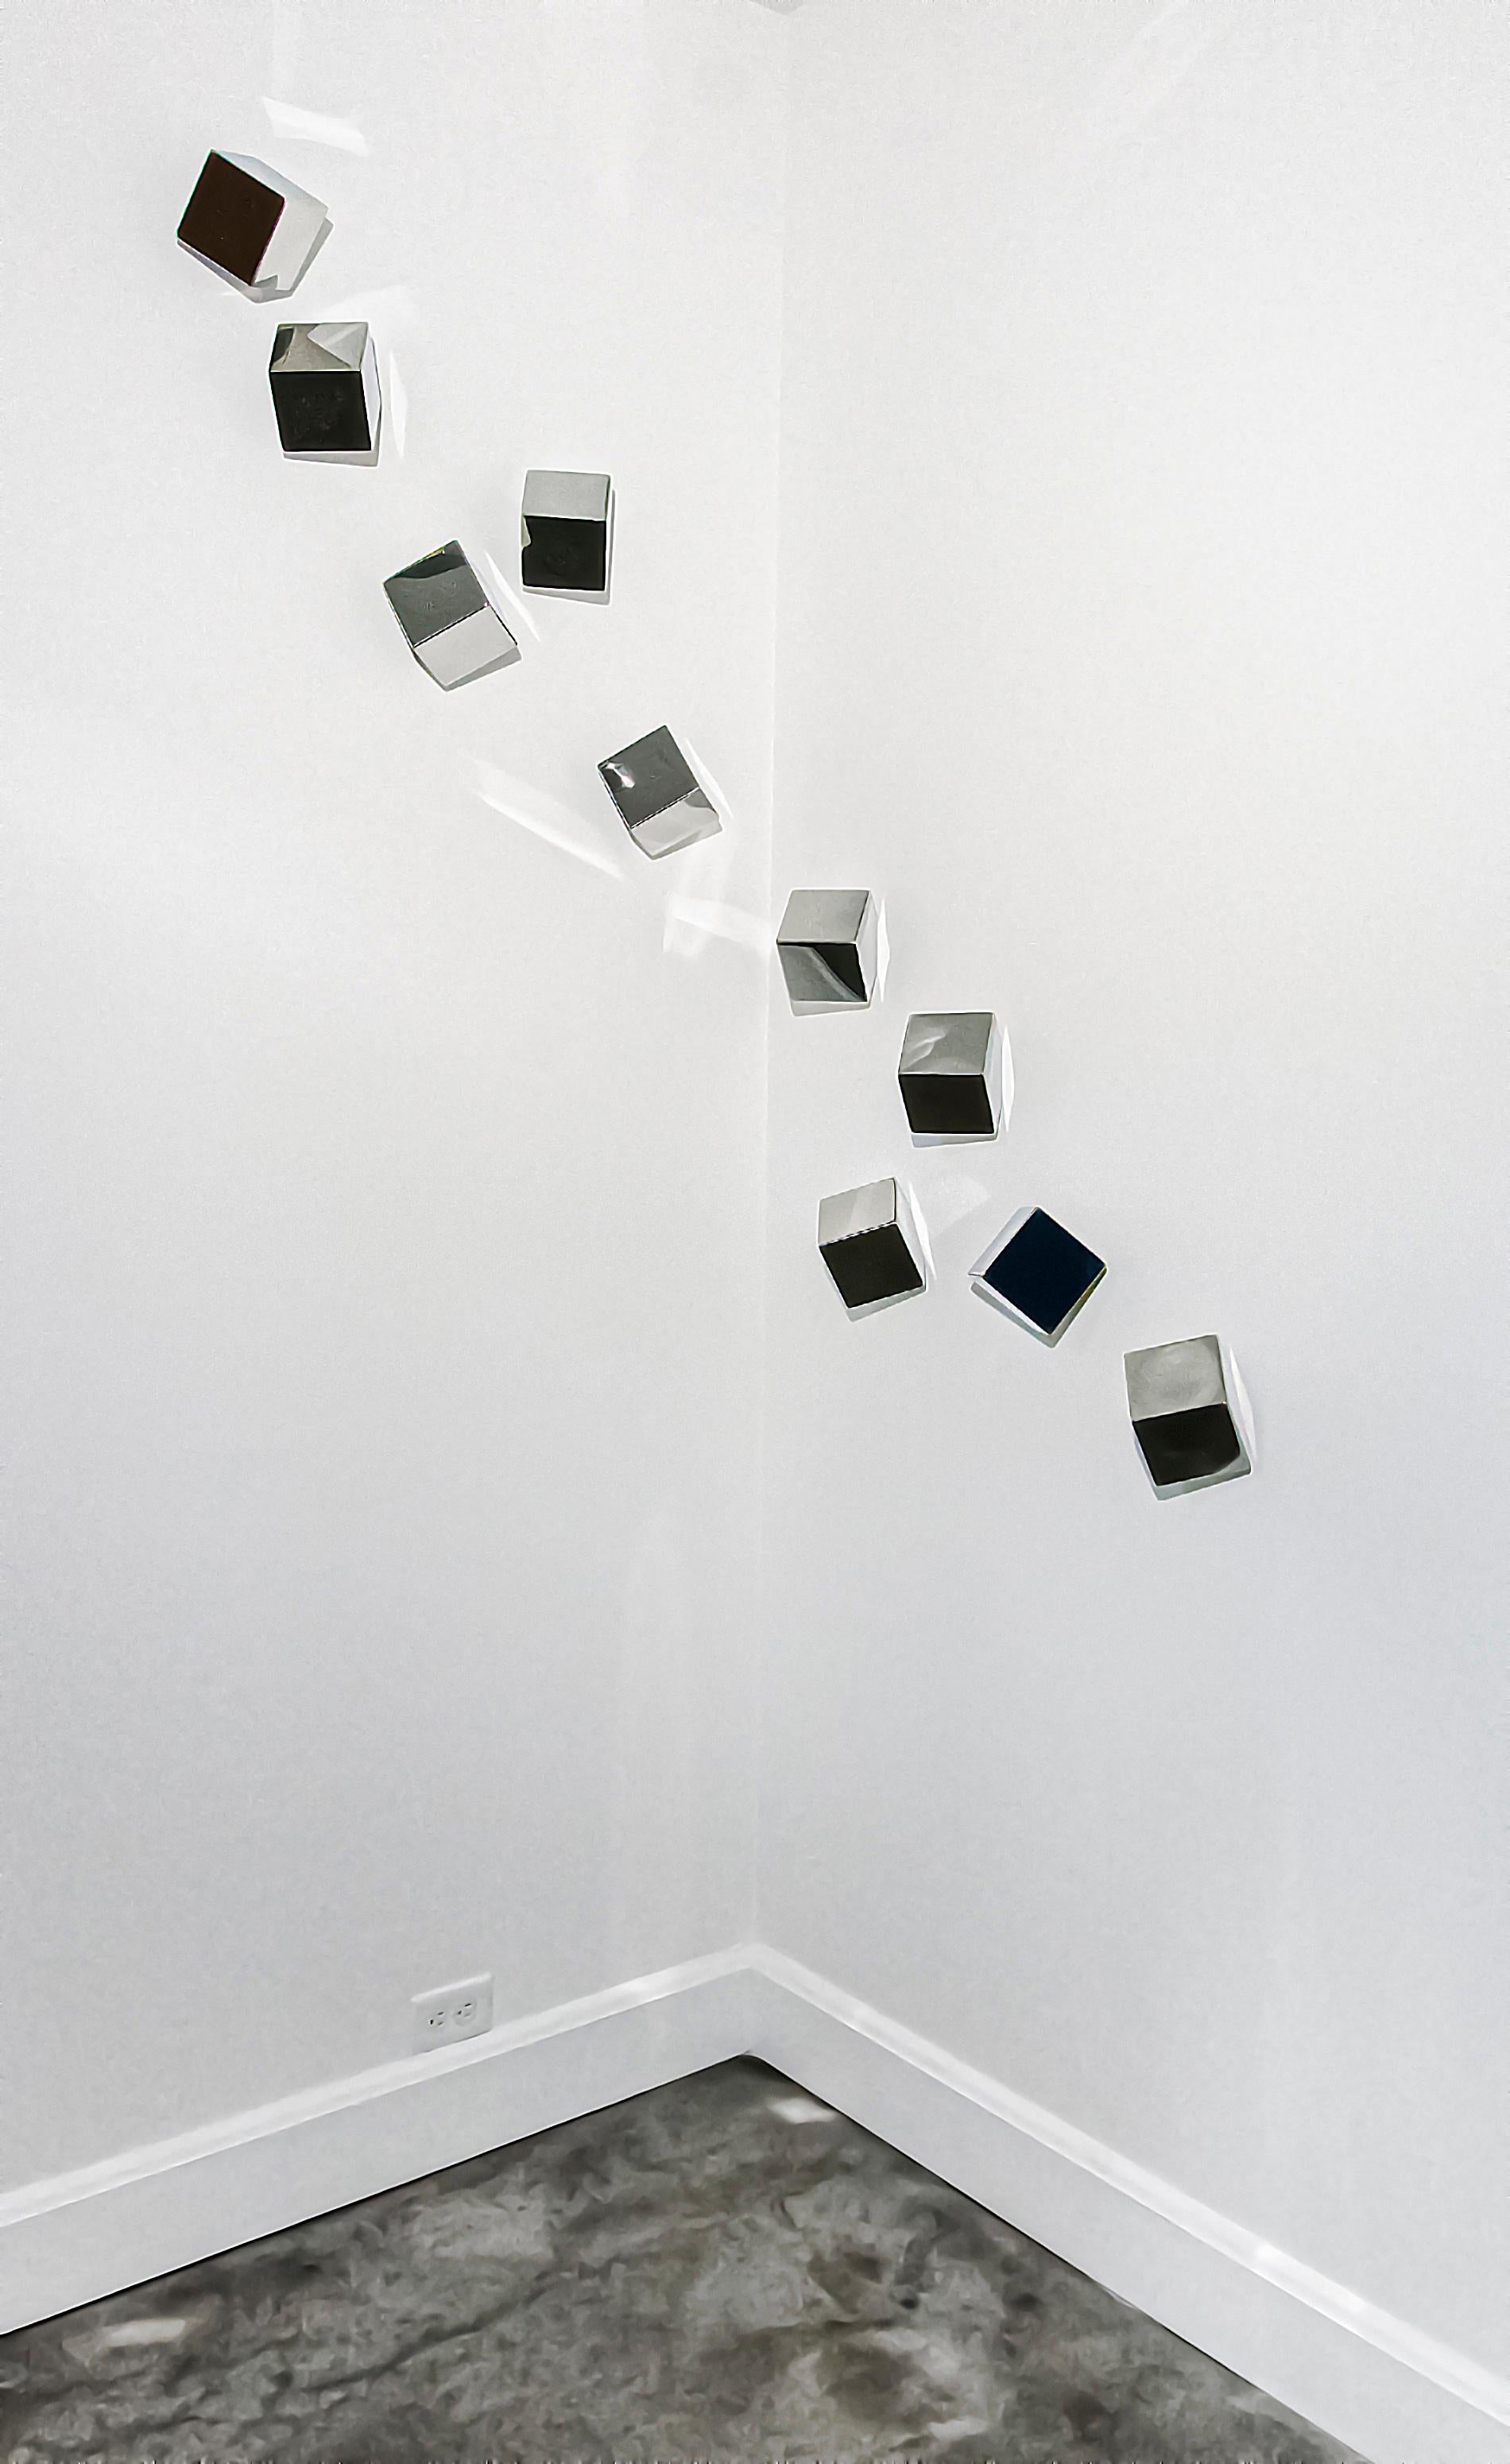 Ten reflective stainless steel cubes drift across the wall in this dazzling sculpture by California artist, Lori Cozen-Geller. Her minimalist work is inspired by everyday life and its emotions. Change is part of a series created by the artist after